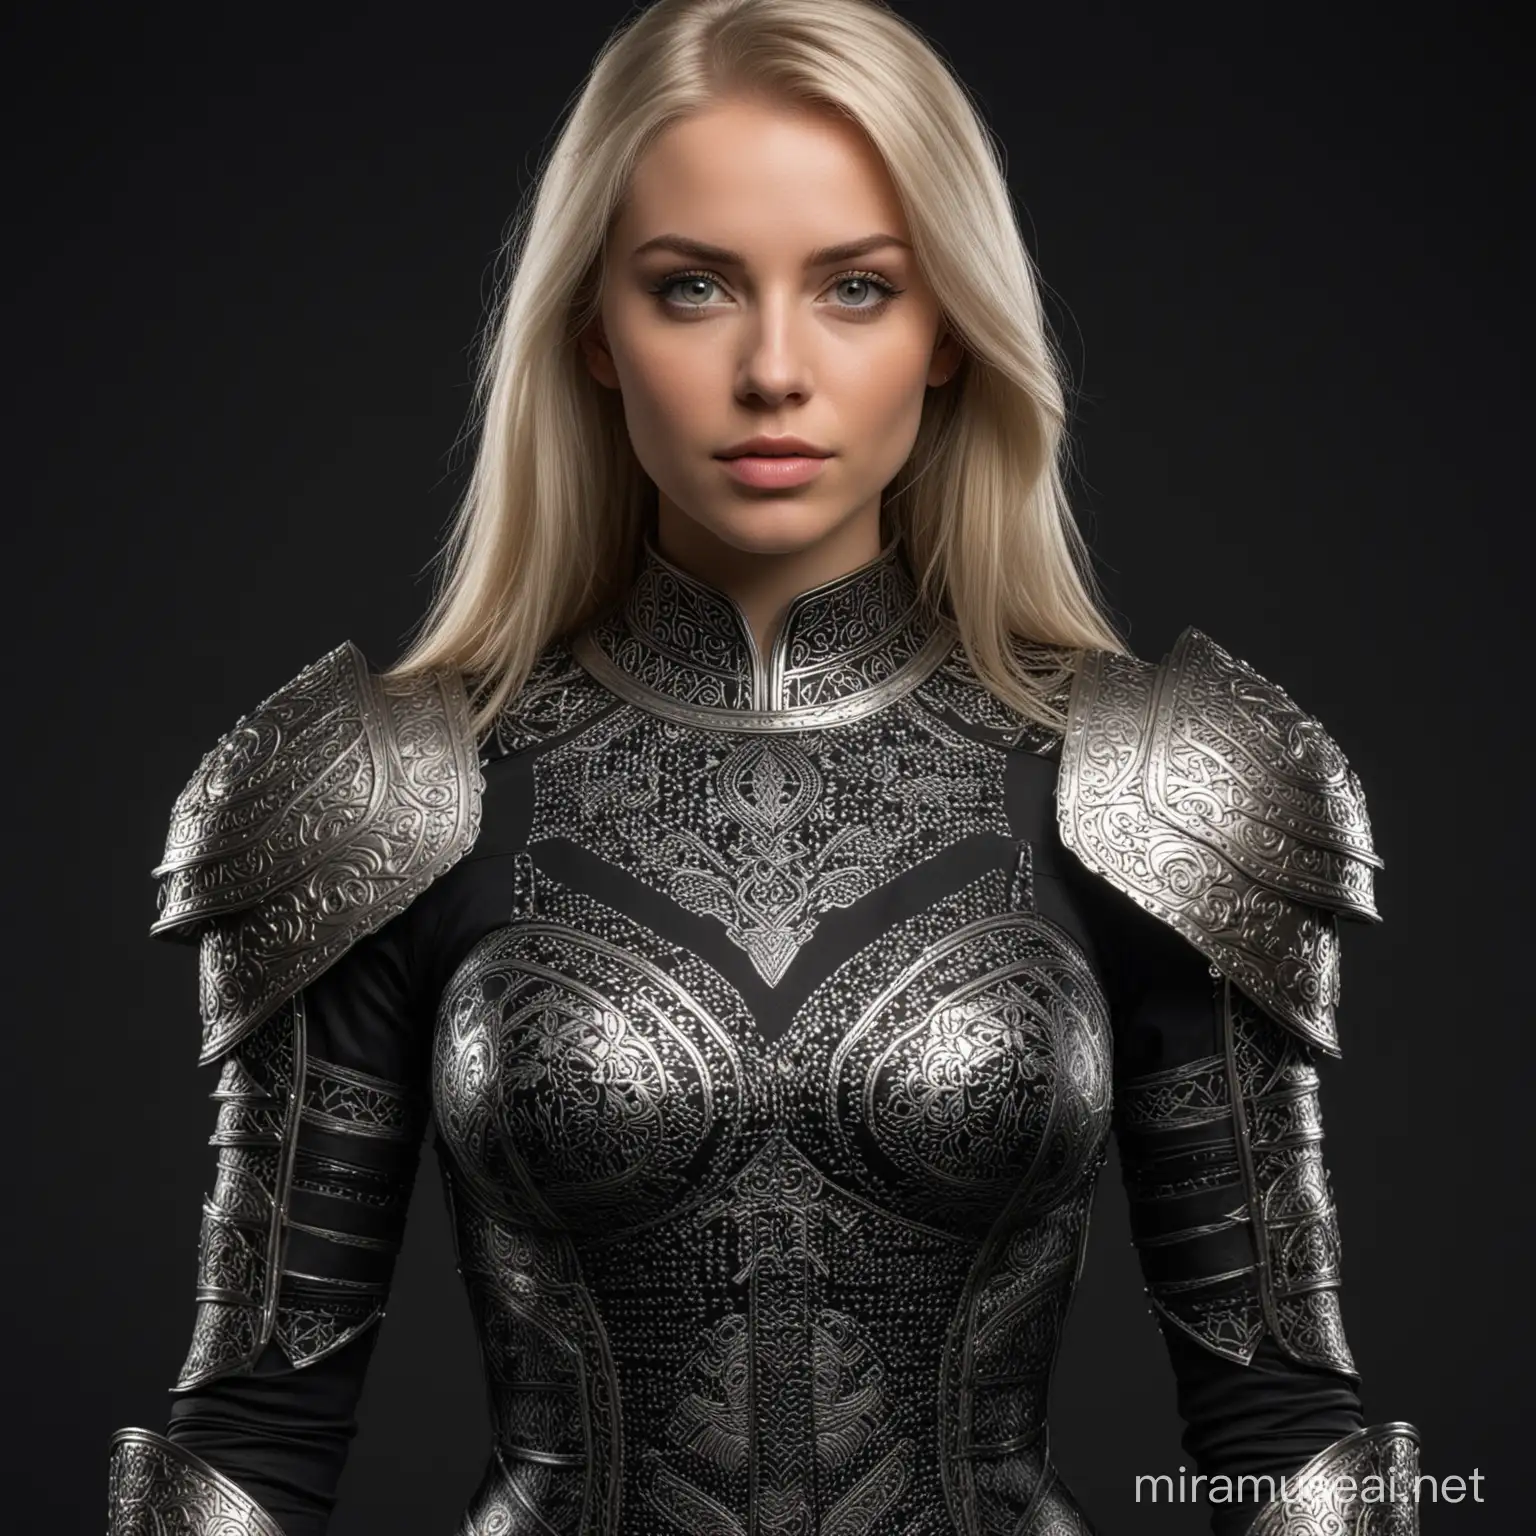 SilverEyed 28YearOld Woman in Silver Armor with Intricate Pattern